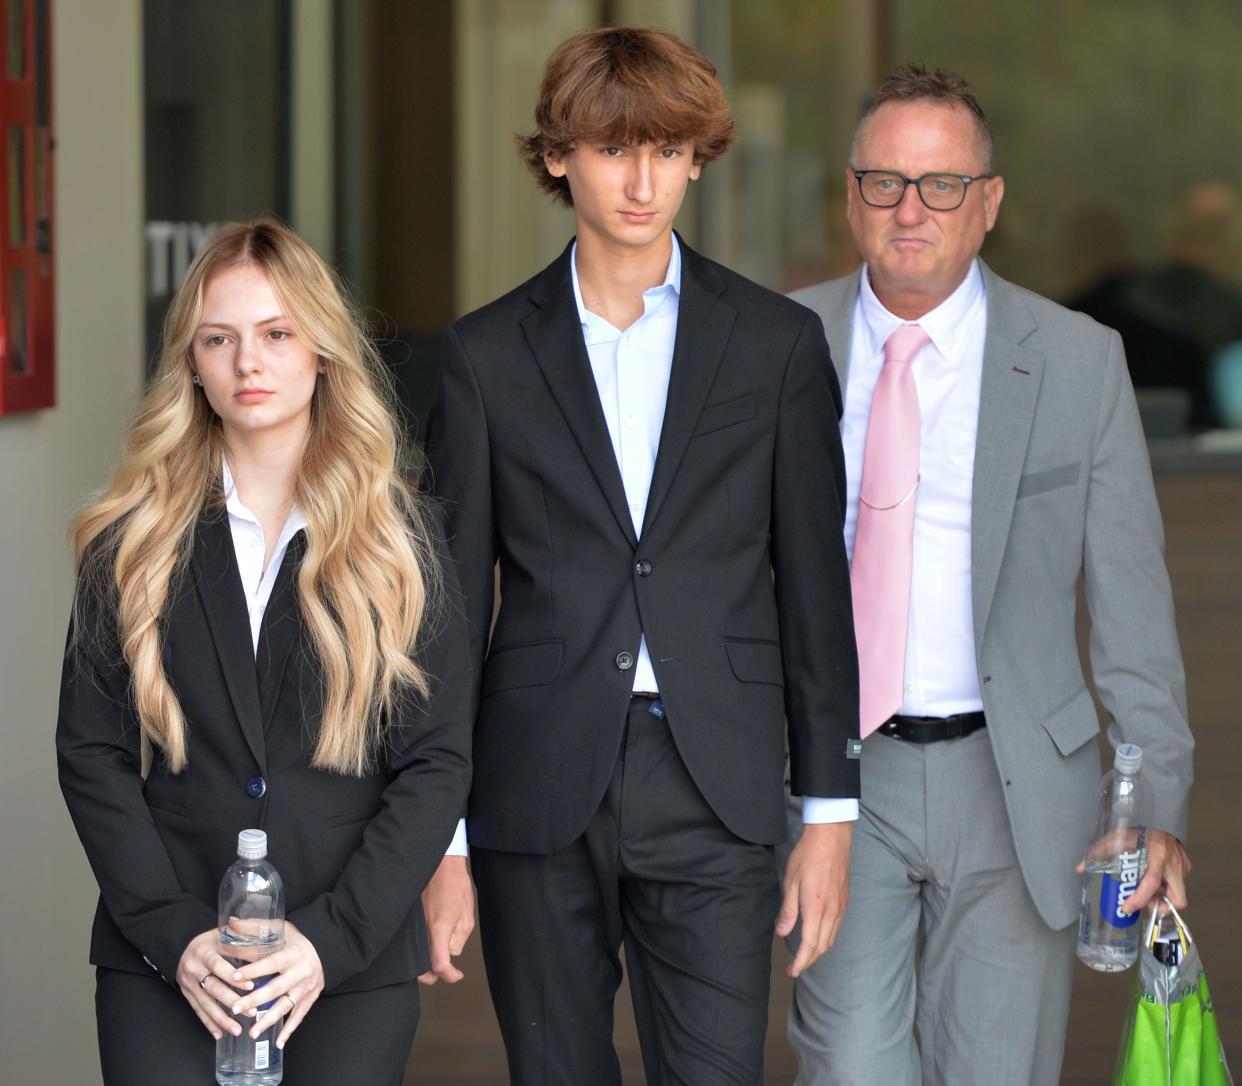 Maya, Kyle and Jack Kowalski leave the South Sarasota County Courthouse in Venice, Florida last week at the conclusion of the first day of their civil lawsuit against Johns Hopkins All Children's Hospital.